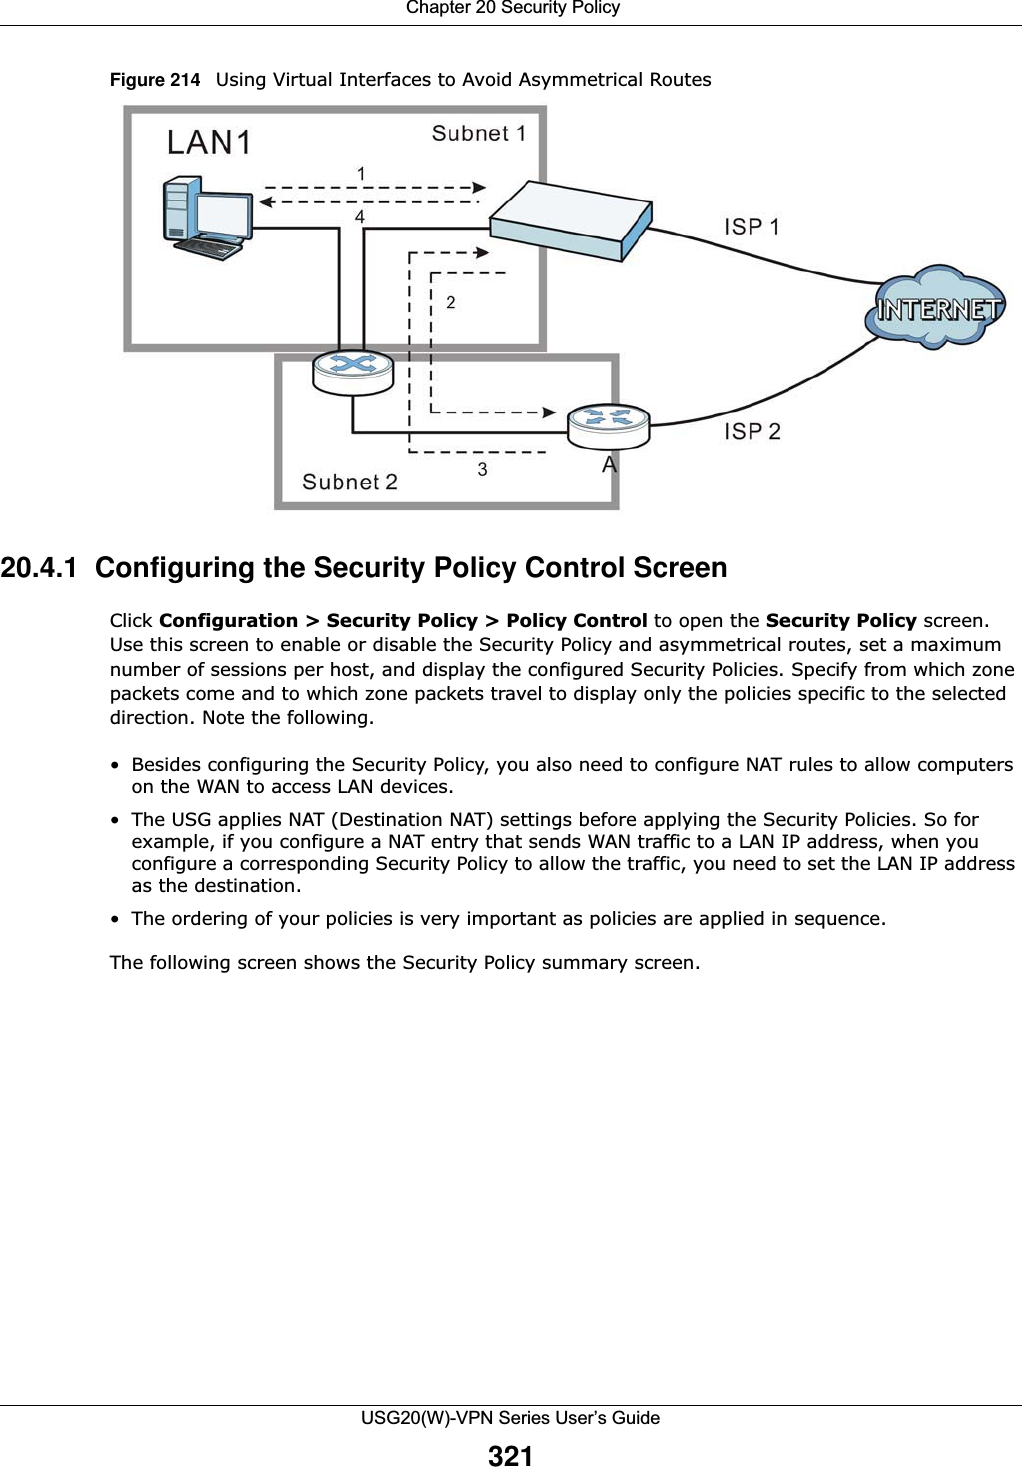  Chapter 20 Security PolicyUSG20(W)-VPN Series User’s Guide321Figure 214   Using Virtual Interfaces to Avoid Asymmetrical Routes    20.4.1  Configuring the Security Policy Control ScreenClick Configuration &gt; Security Policy &gt; Policy Control to open the Security Policy screen. Use this screen to enable or disable the Security Policy and asymmetrical routes, set a maximum number of sessions per host, and display the configured Security Policies. Specify from which zone packets come and to which zone packets travel to display only the policies specific to the selected direction. Note the following.• Besides configuring the Security Policy, you also need to configure NAT rules to allow computers on the WAN to access LAN devices. • The USG applies NAT (Destination NAT) settings before applying the Security Policies. So for example, if you configure a NAT entry that sends WAN traffic to a LAN IP address, when you configure a corresponding Security Policy to allow the traffic, you need to set the LAN IP address as the destination. • The ordering of your policies is very important as policies are applied in sequence.The following screen shows the Security Policy summary screen.